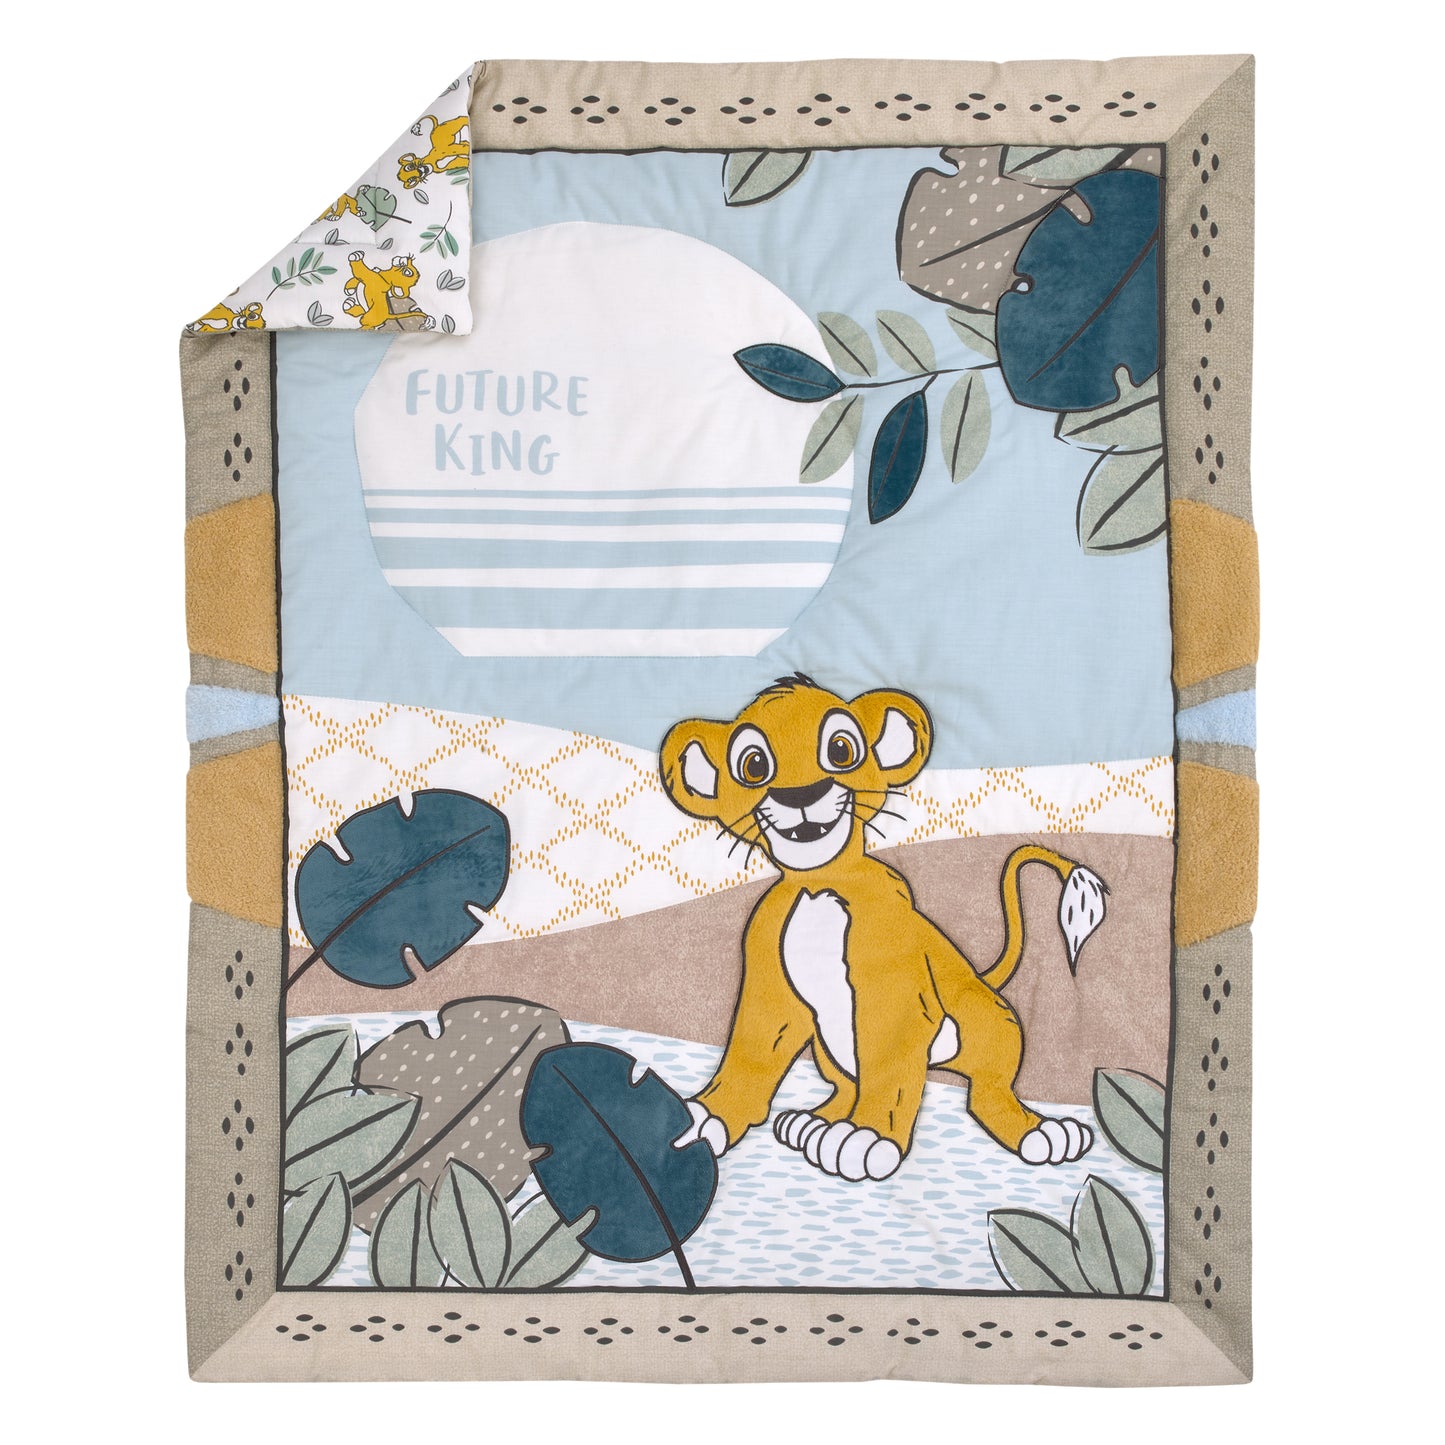 Disney Lion King Blue, Green, Taupe and Gold Simba Future King 3 Piece Nursery Crib Bedding Set - Comforter, Cotton Fitted Crib Sheet, and Crib Skirt